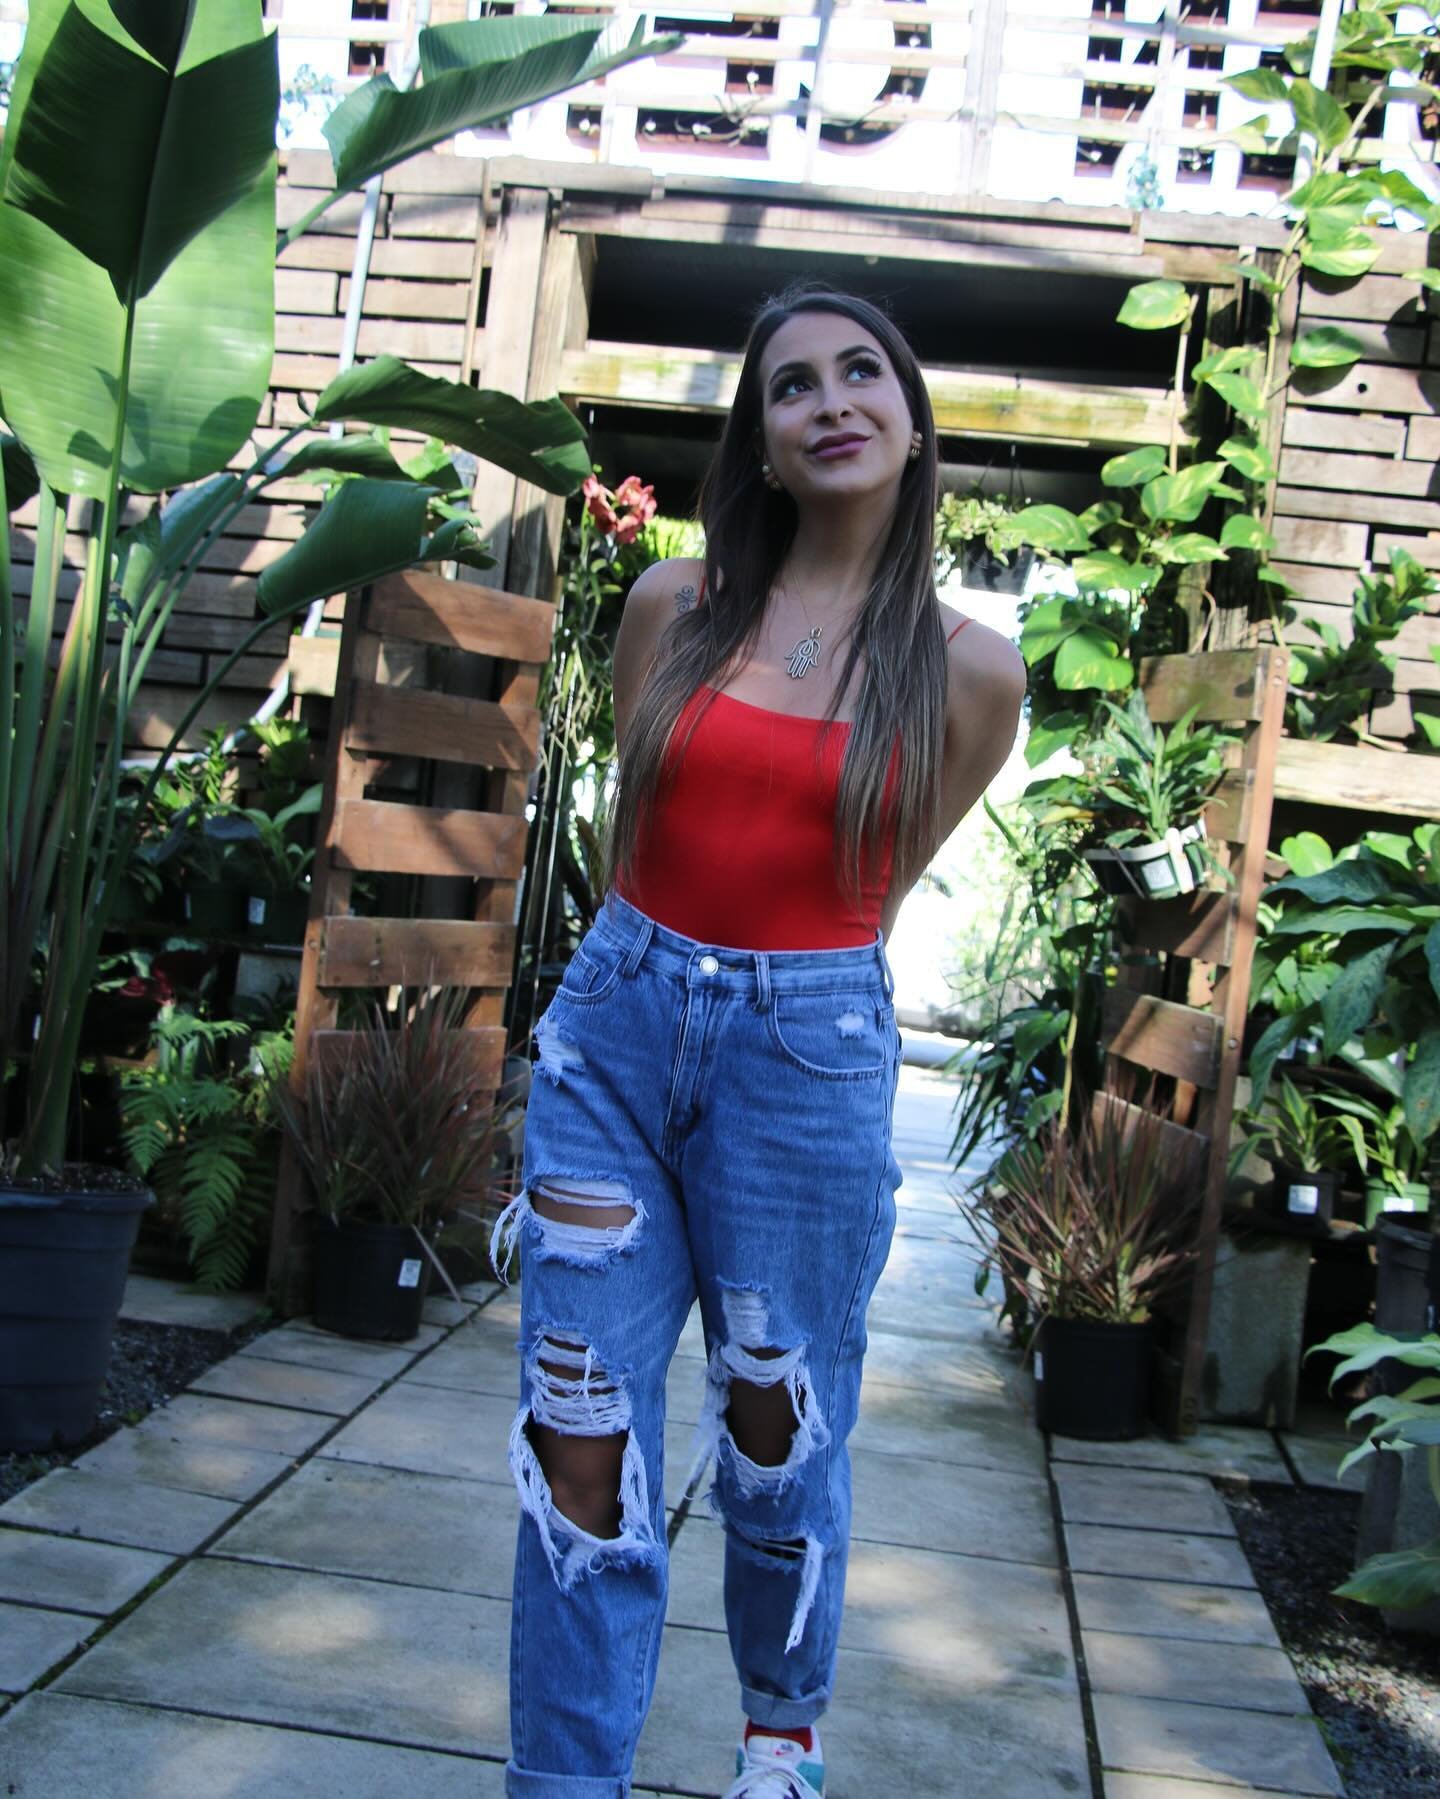 beautiful day for an impromptu shoot with some plants 📸🪴❤️ @itscaitlynwhite @midtowngardencenter 
.
.
.
.
.
.
.
♡ ♪ &rarr;
#midtown #miami #garden #nature #makeup #photoshoot #miamigirl #smile #happiness #rippedjeans #wynwood #bliss #nike